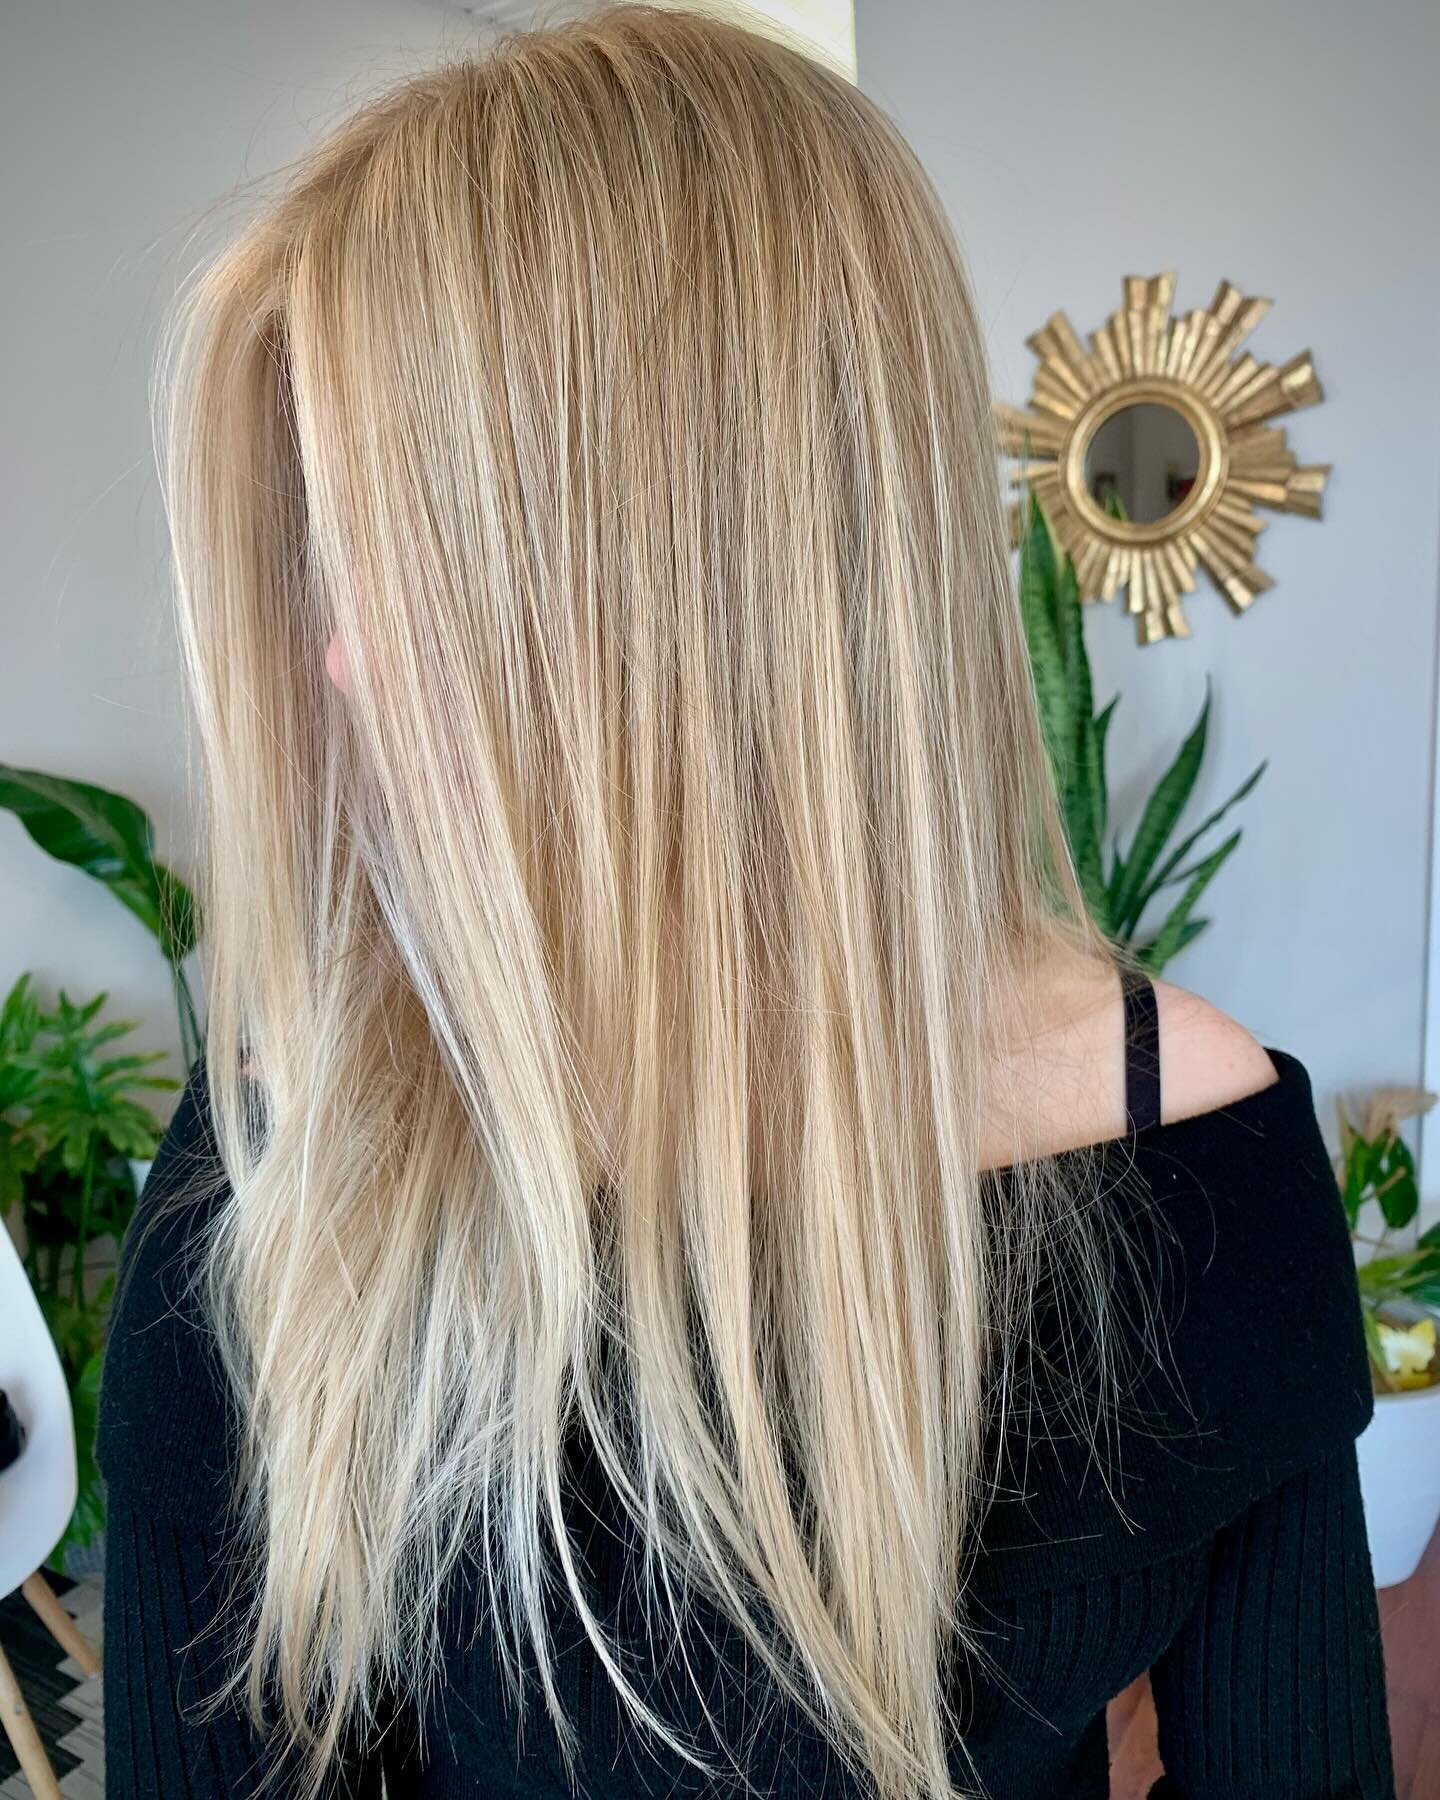 Blonde upgrade for your feed today. 

It&rsquo;s a full ass highlight w/ some tip outs and a lil&rsquo; root tap. 

If you don&rsquo;t know what any of that means that&rsquo;s totally cool. 

It took 3 hours. 

#chicagobalayageartist #chicagobalayage